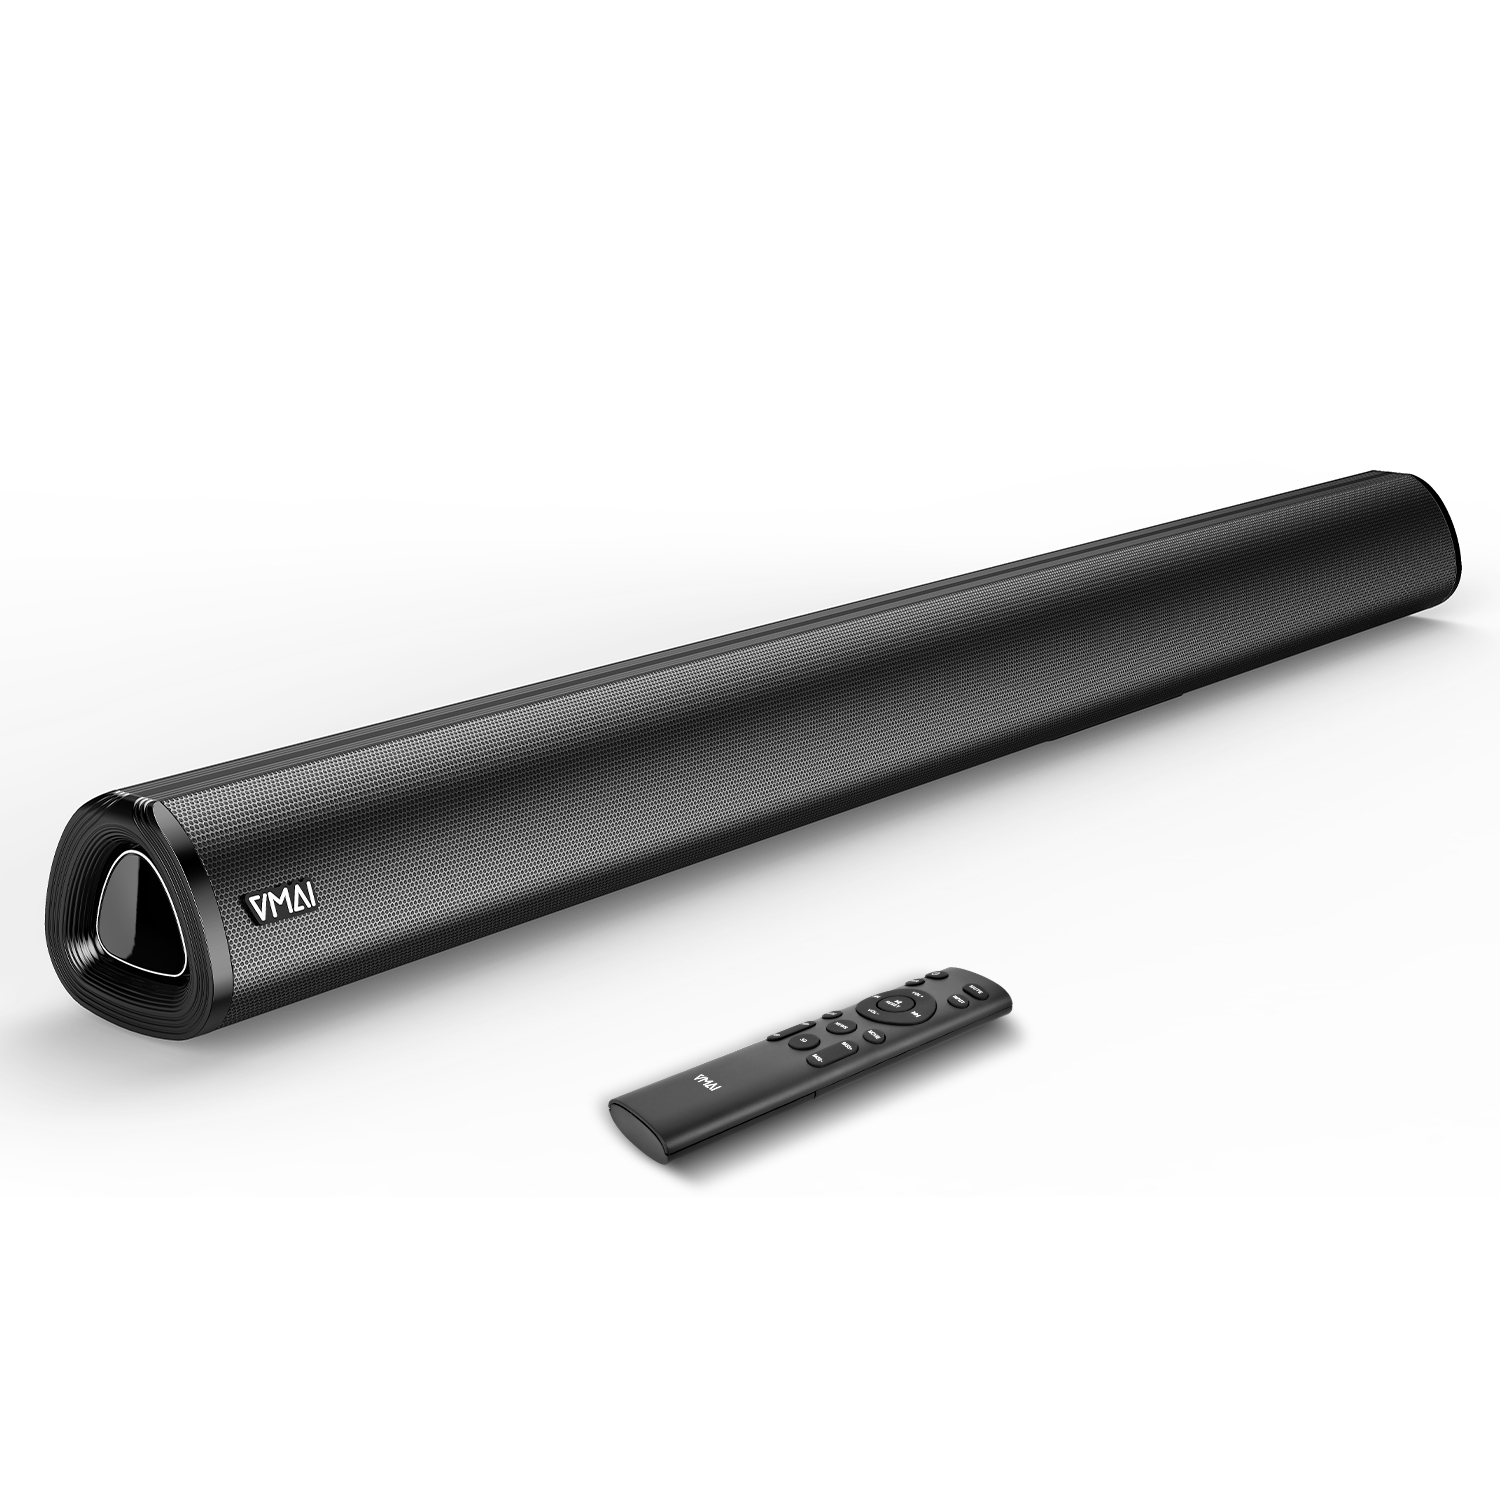 Sound bar, 36 INCH TV Soundbar Wired and Wireless Bluetooth 5.0 Speaker for TV, Home Theater Surround Sound System HDMI/Optical/Aux/USB